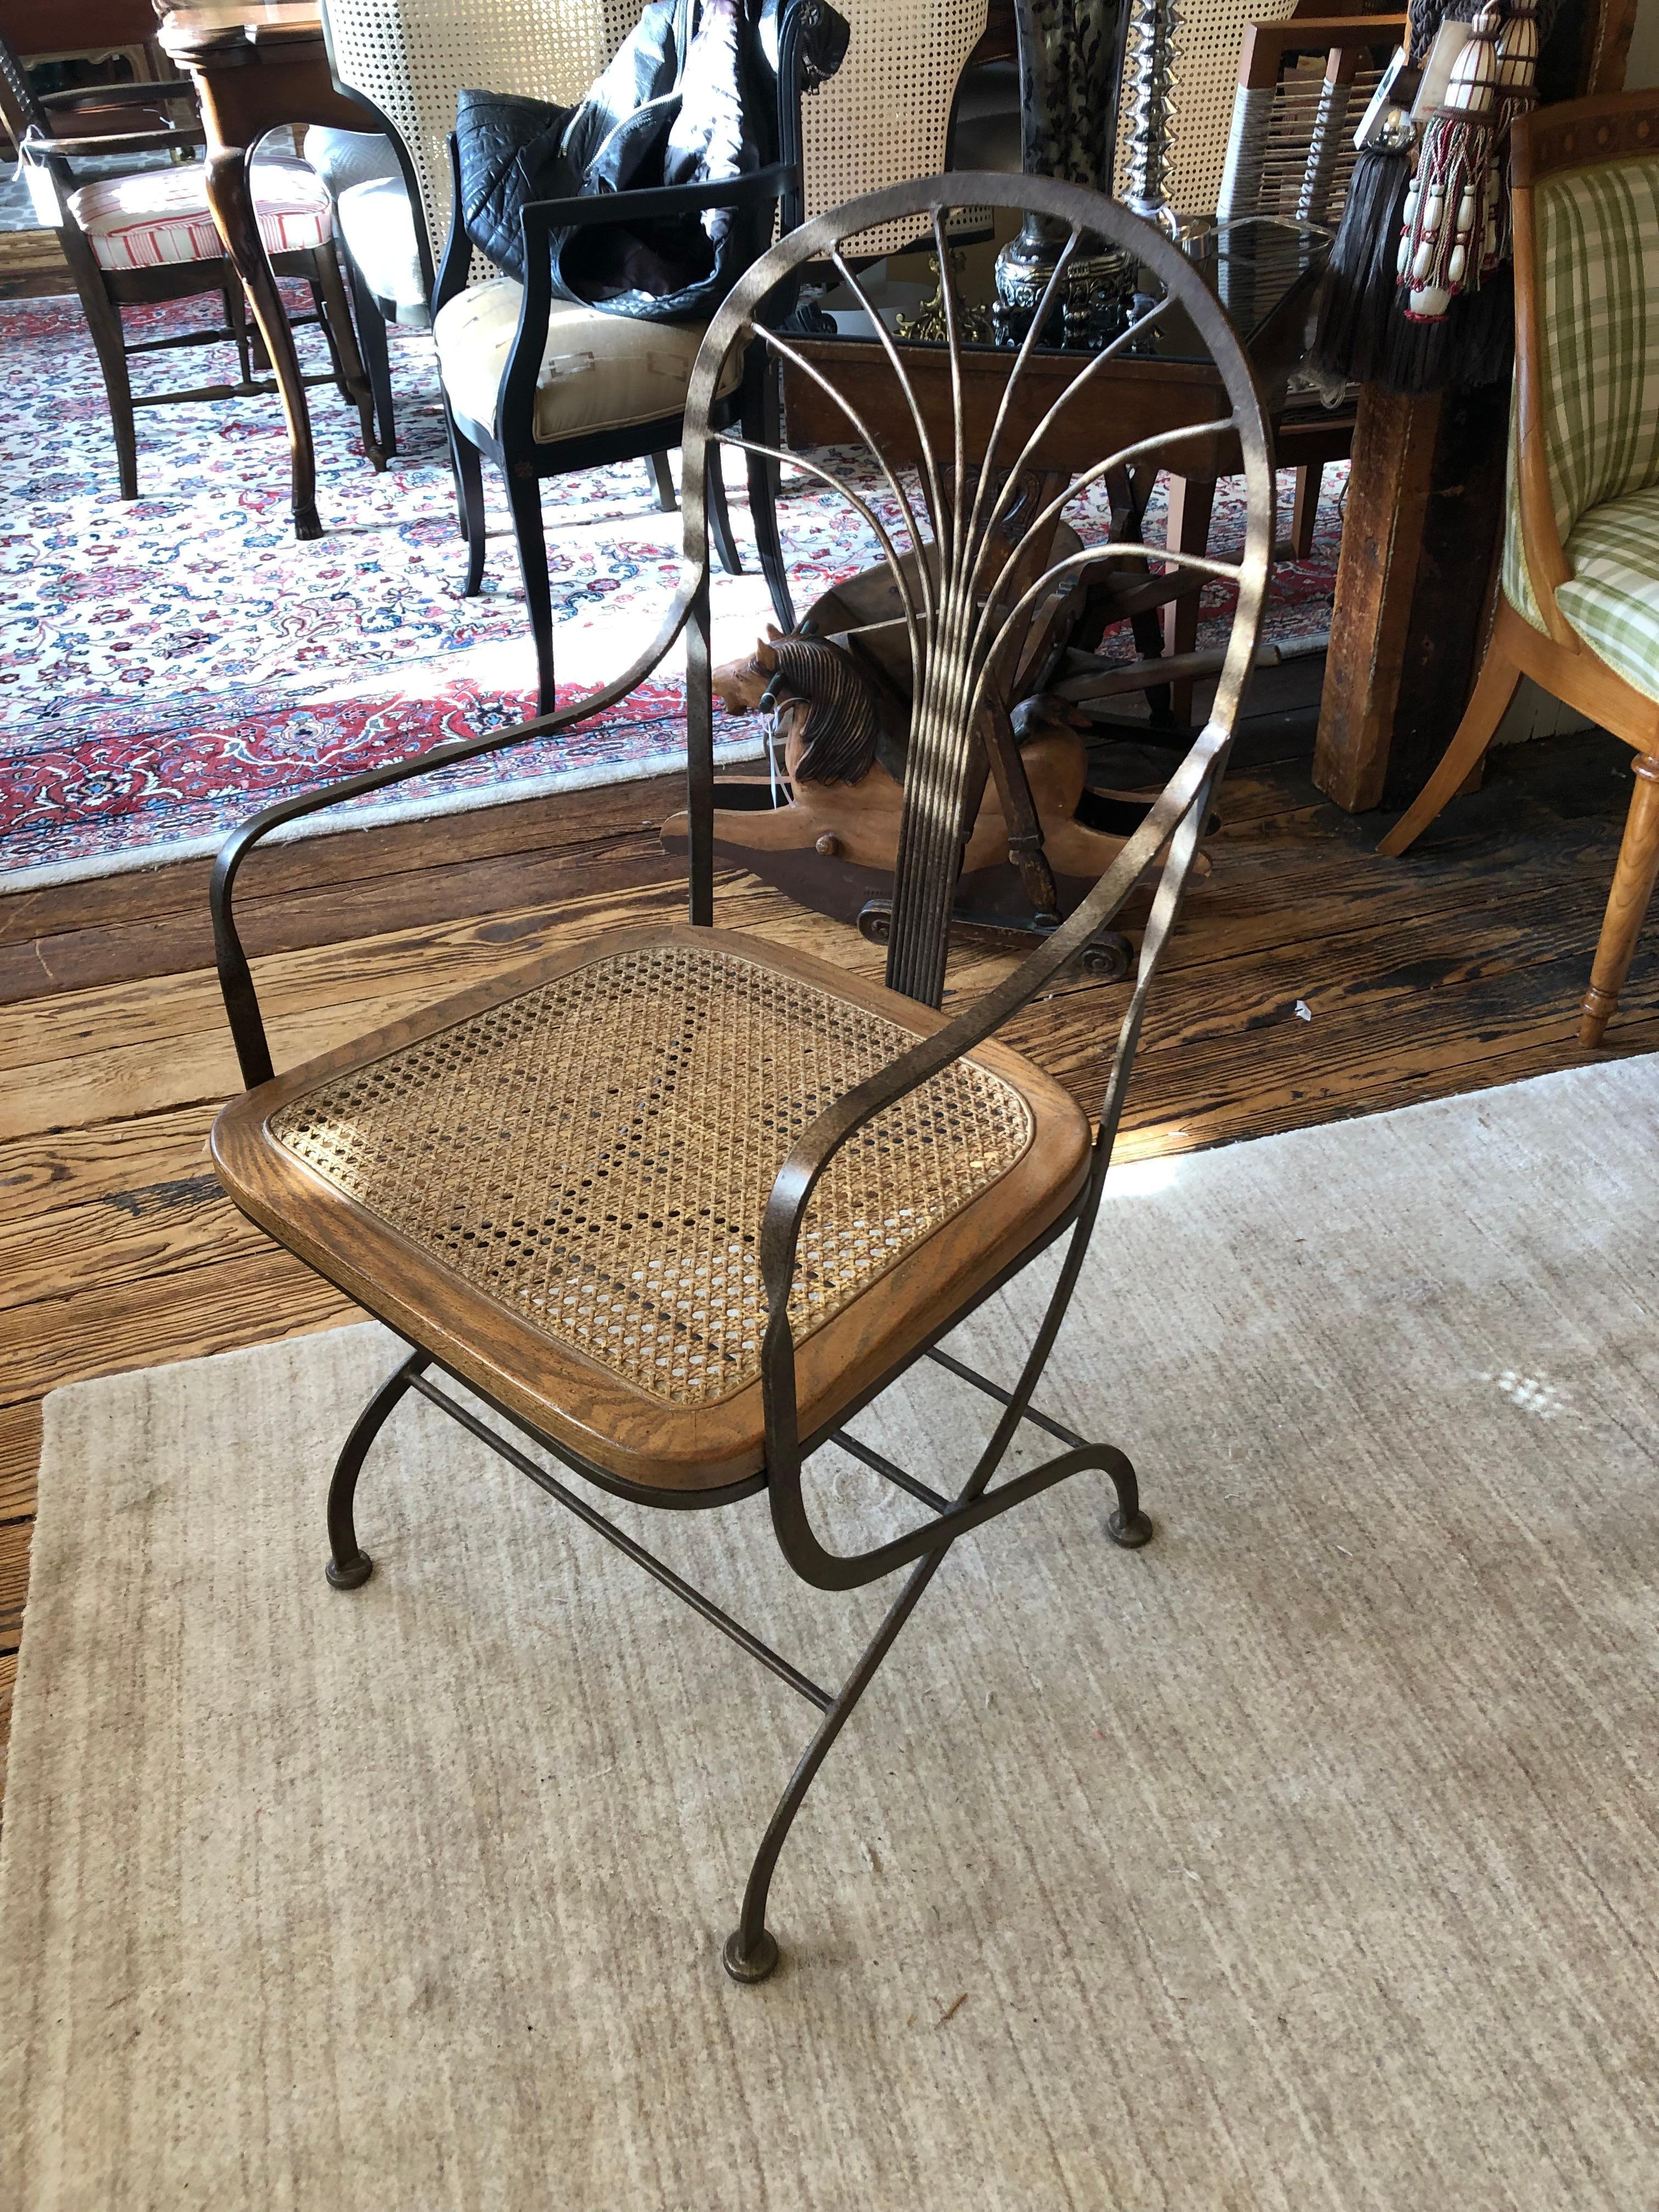 A great looking armchair or desk chair with an unusual earthy blend of warm bronze finish metal and wood surrounded cane seat. The chair is solid and comfortable with an airy look. The metal on the seat back suggests the branches of an abstract